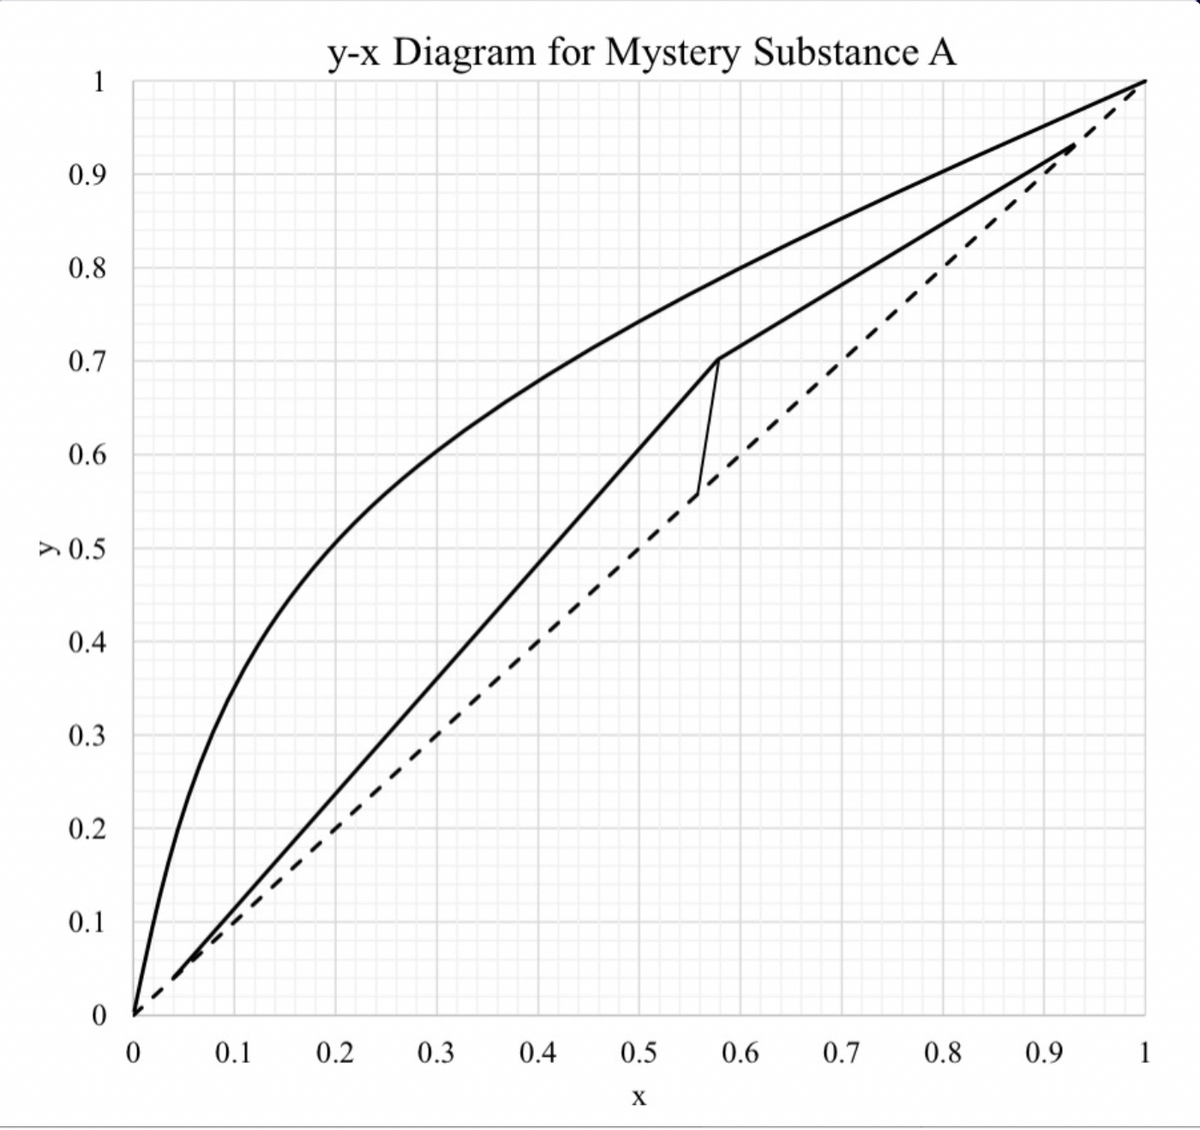 y-x Diagram for Mystery Substance A
1
0.9
0.8
0.7
0.6
> 0.5
0.4
0.3
0.2
0.1
0.1
0.2
0.3
0.4
0.5
0.6
0.7
0.8
0.9
1
X
